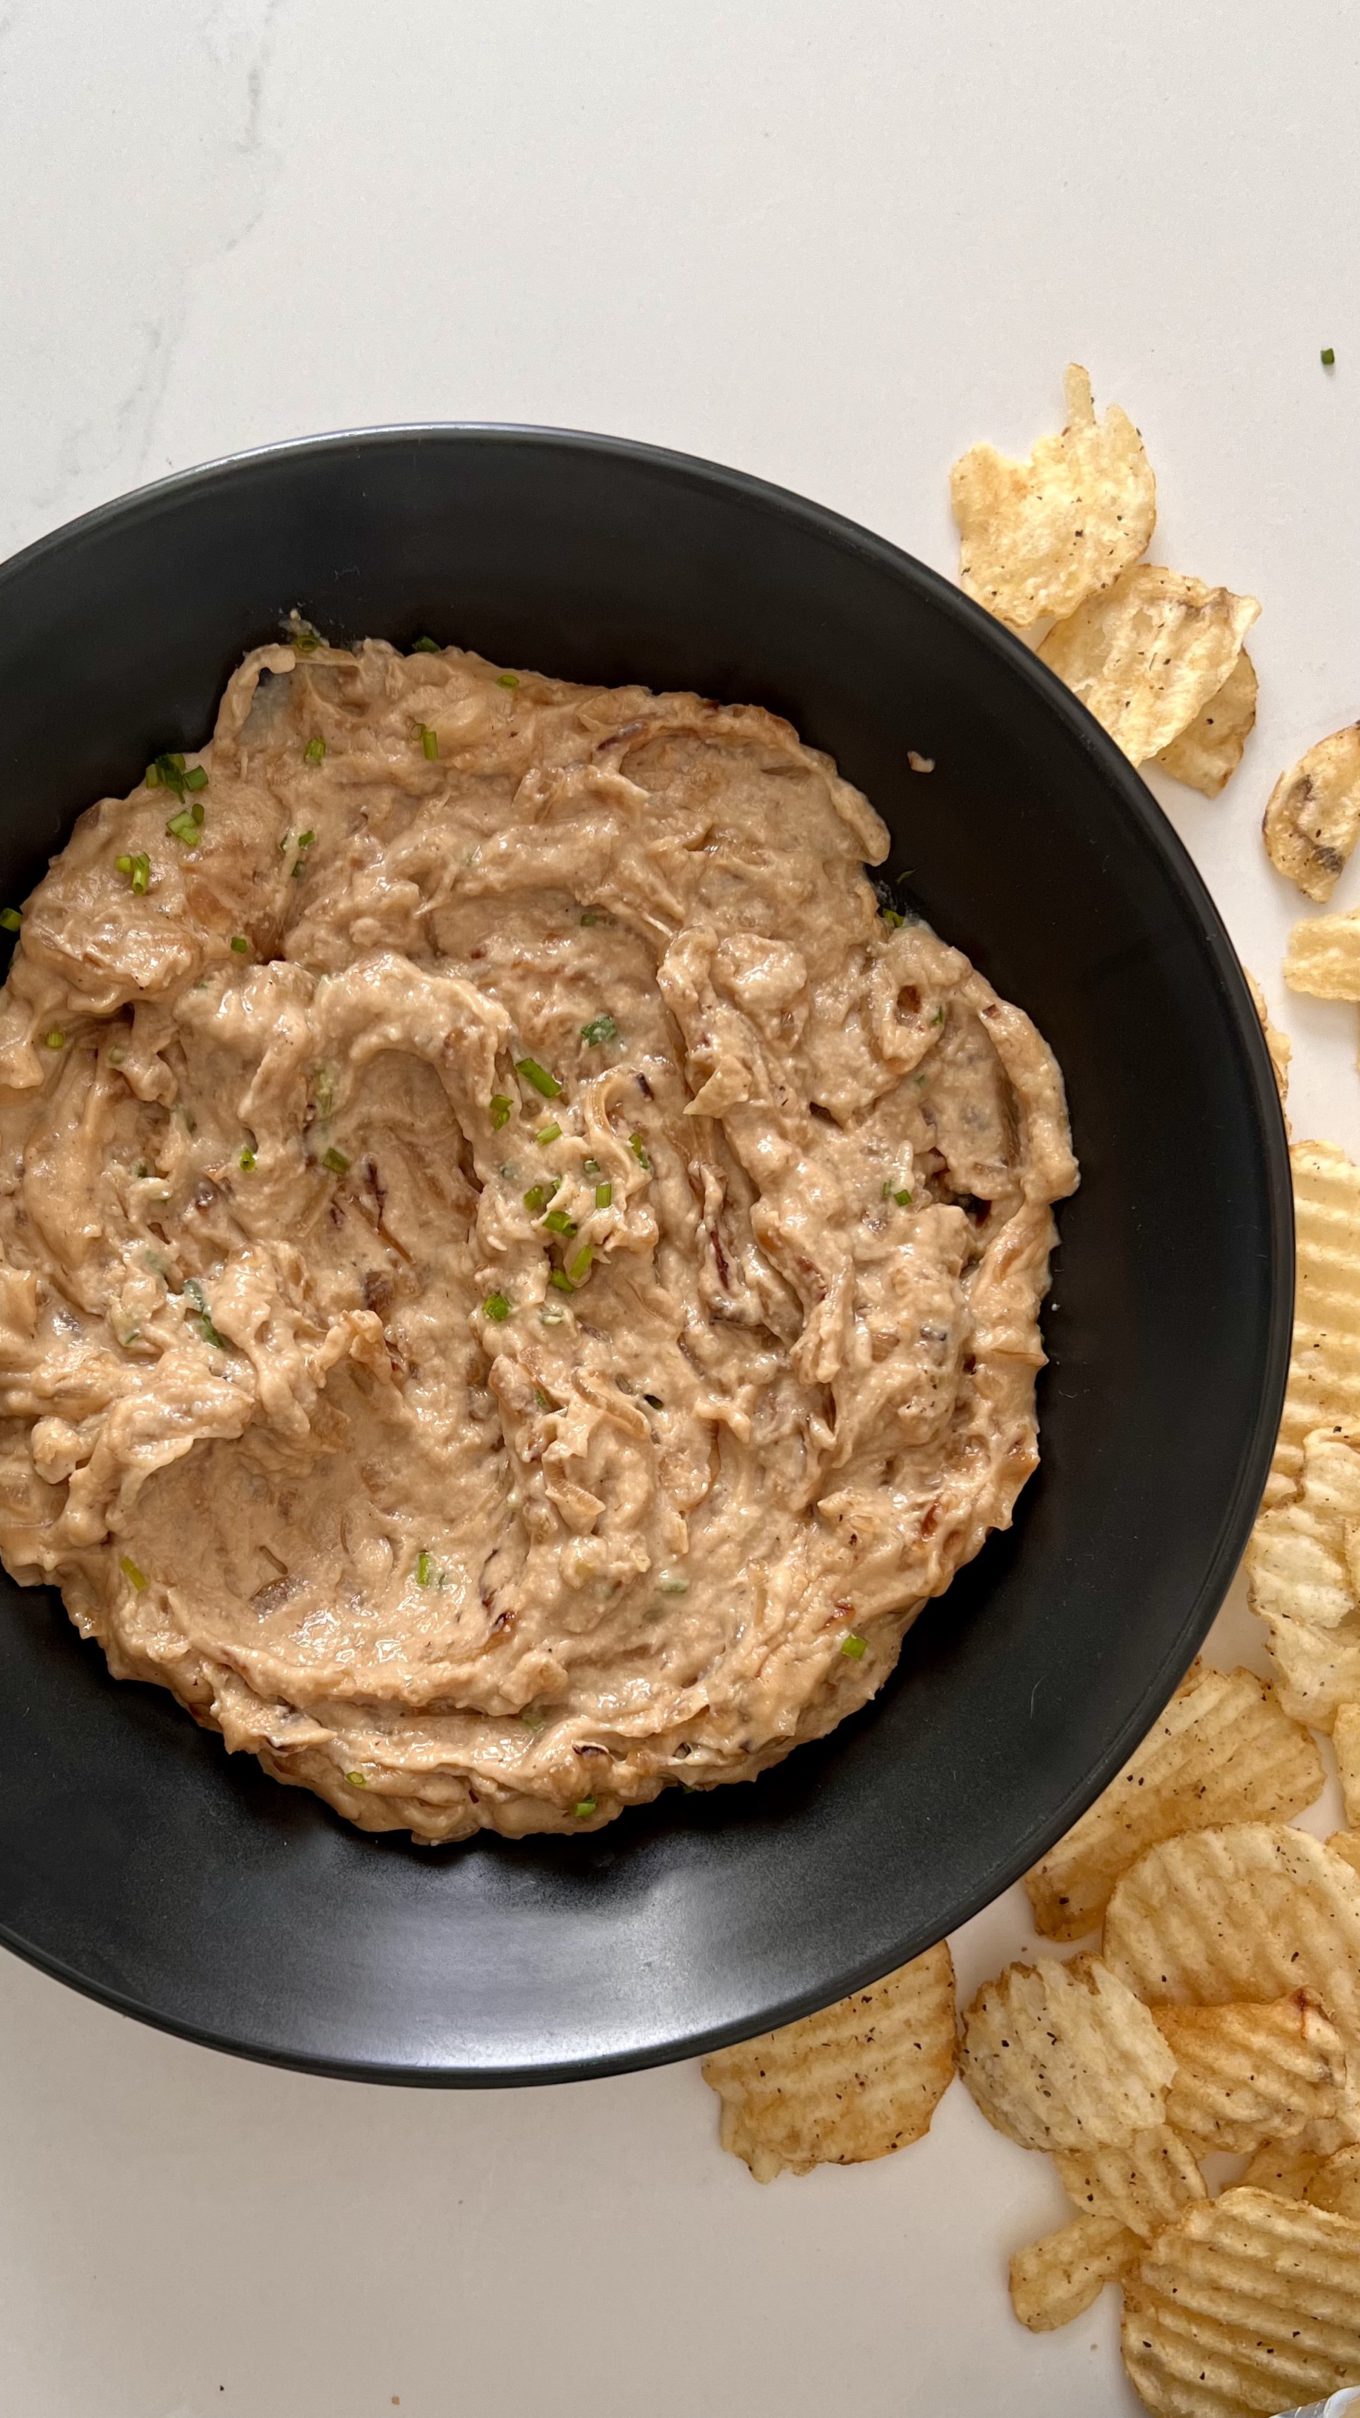 A plate of vegan onion dip with chips on the side.